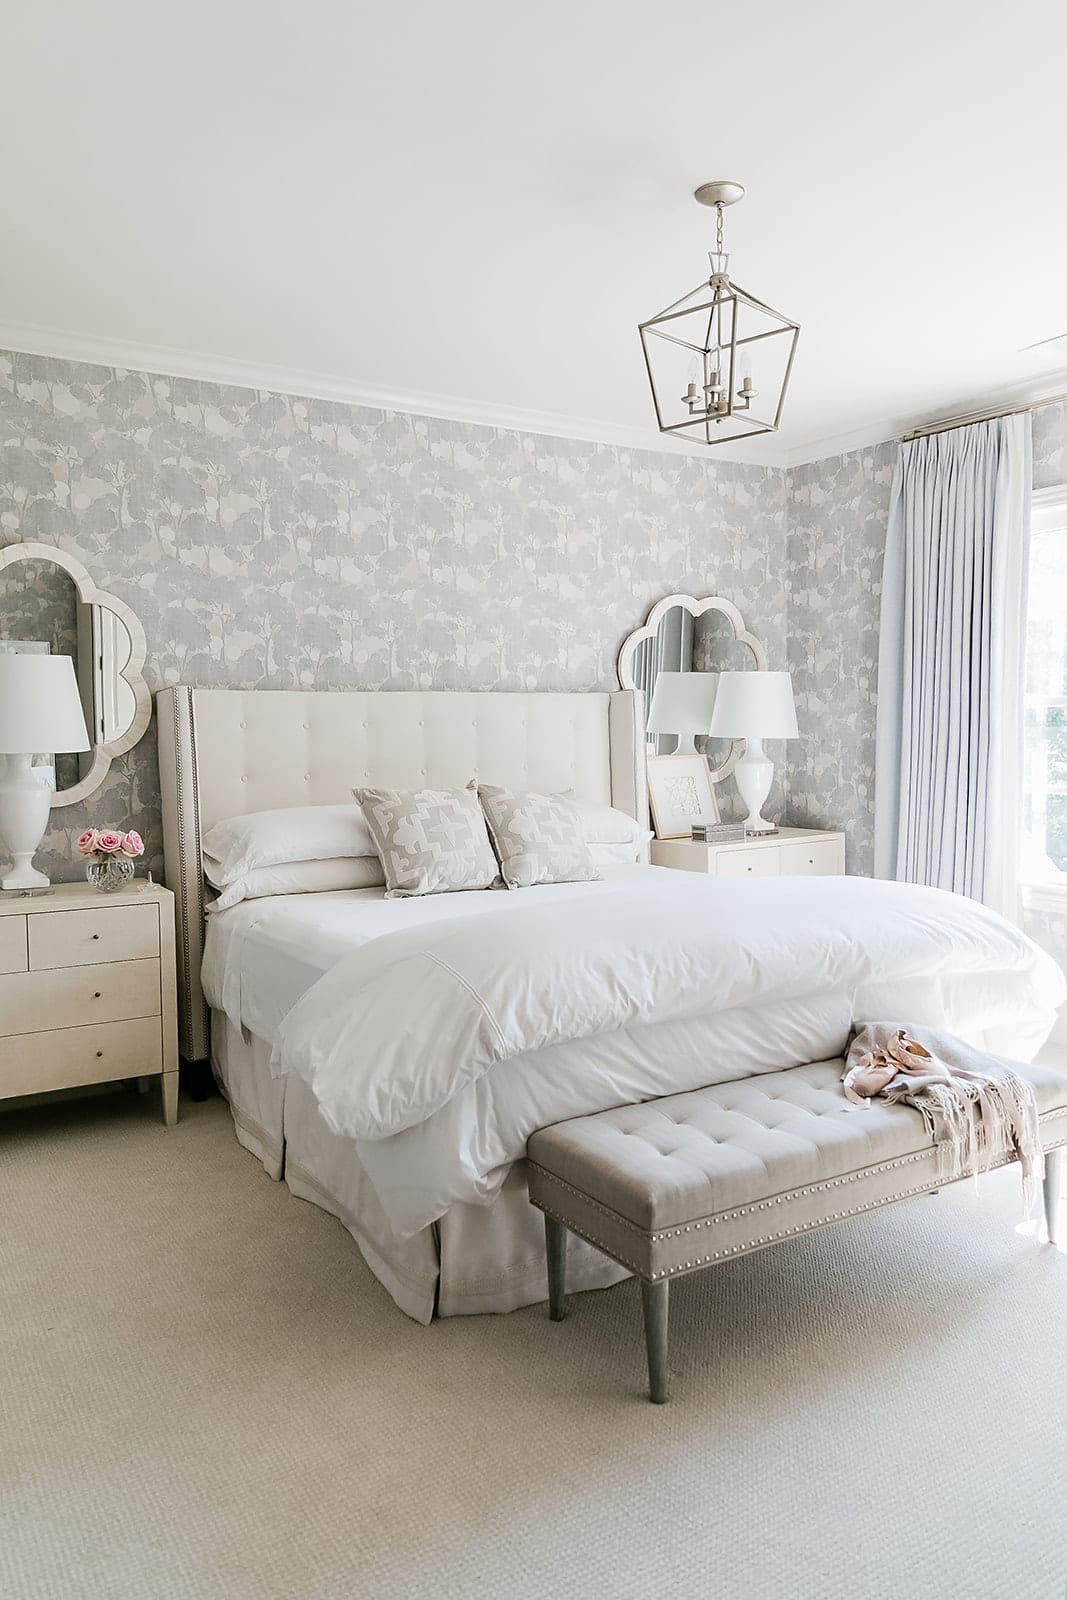 Guest bedroom makeover. Lavender floral wallpaper, white hotel sheets, Madegoods dresser and custom headboard from Calico.